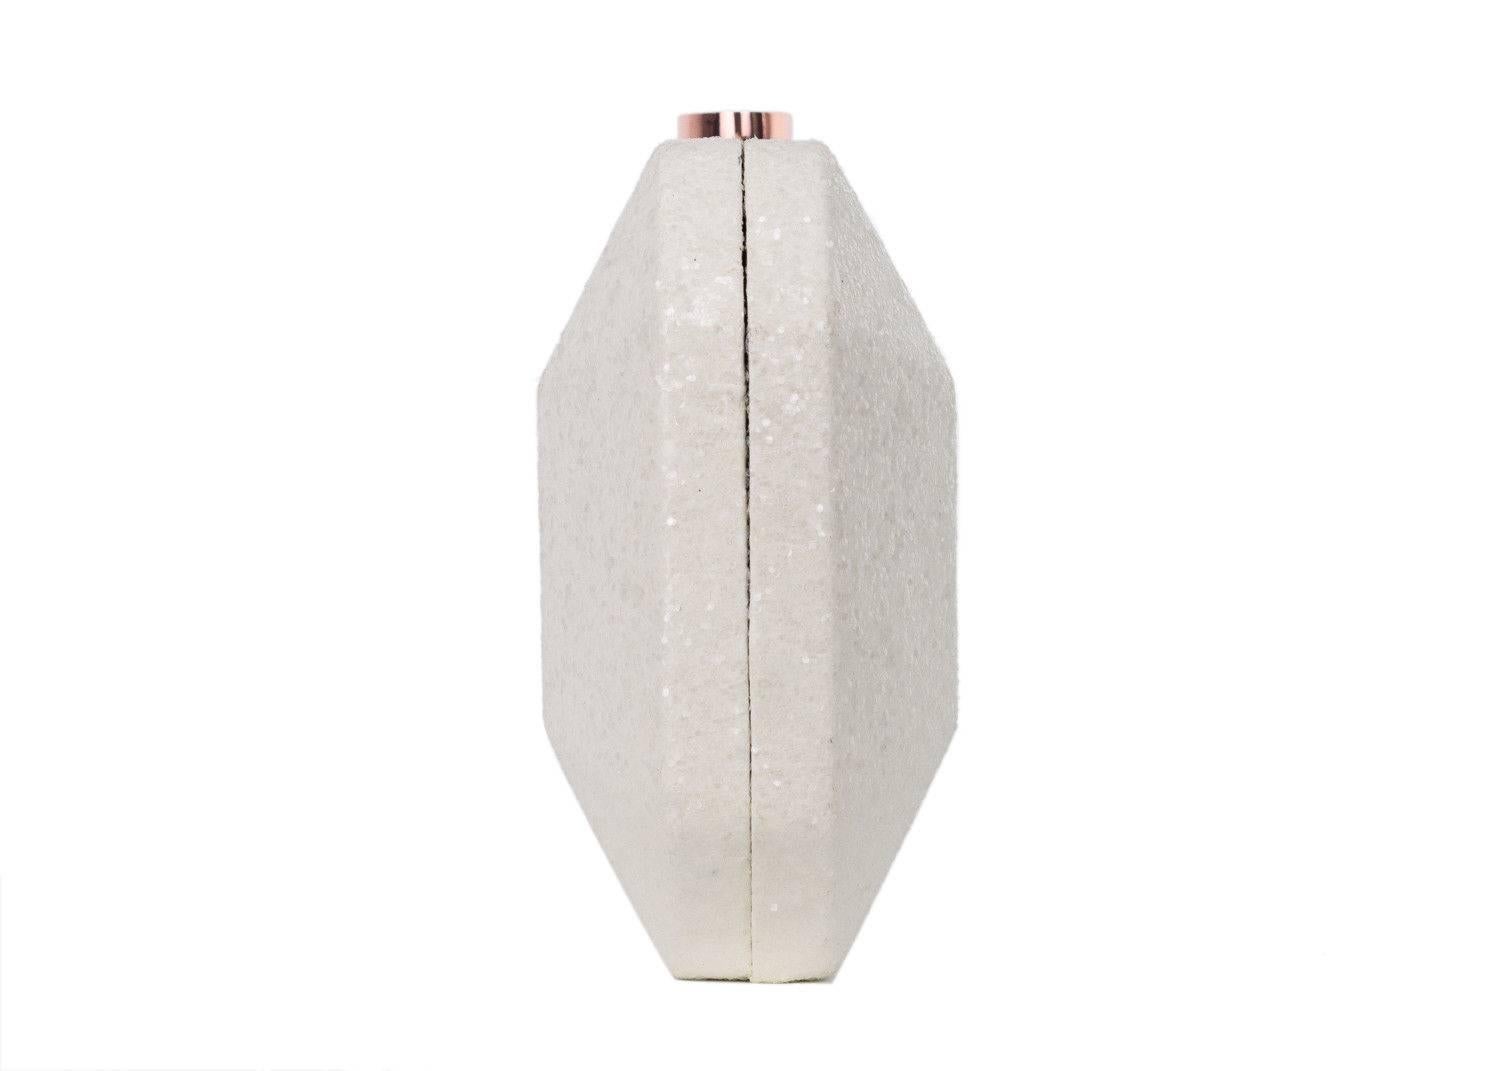 Just Cavalli white ivory clutch bag. This clutch bag features shiny glitter detailing throughout the bag with a matching rose gold buckle in a push lock closure. This clutch is perfect for evening wear or special events such as parties and prom.